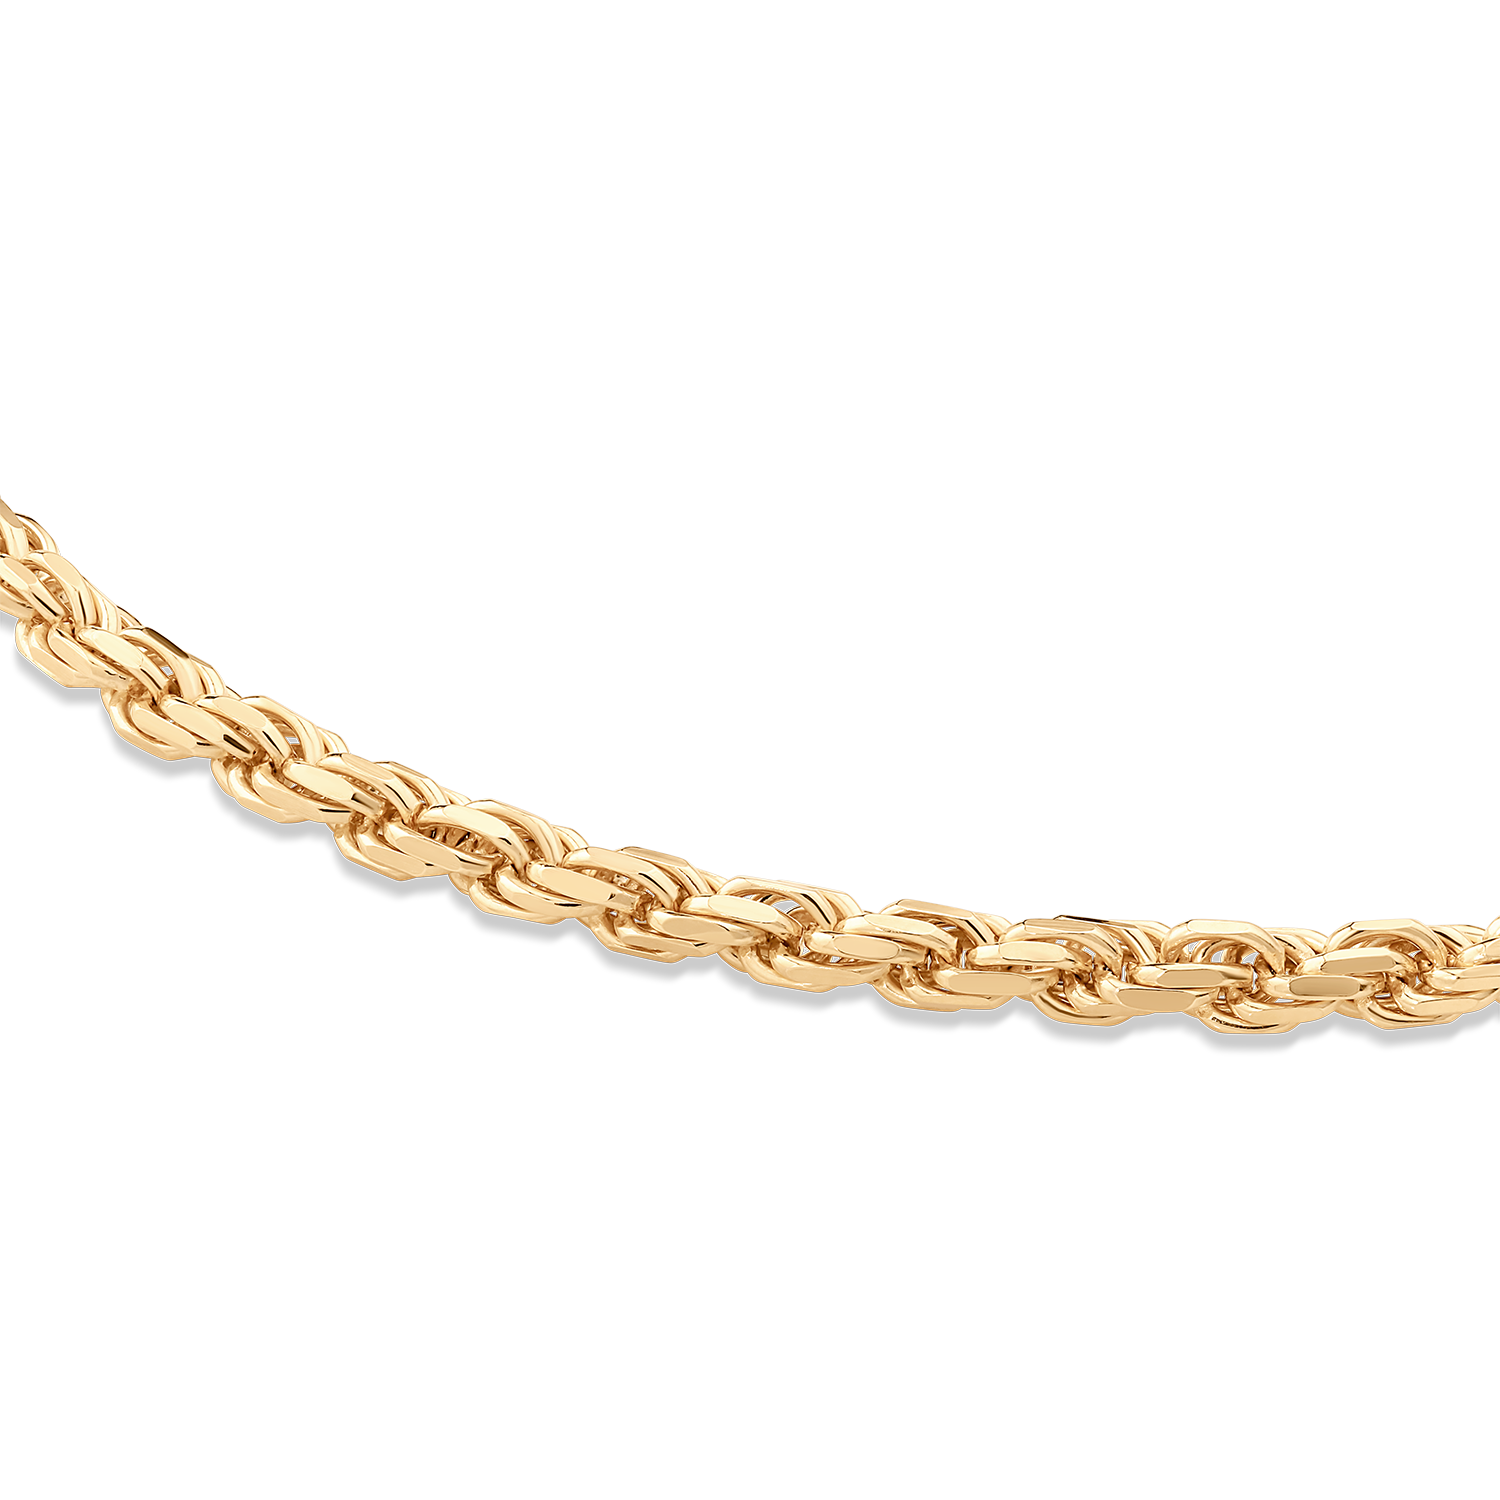 Mens Two tone Gold Stainless Steel Rope Chain Necklace